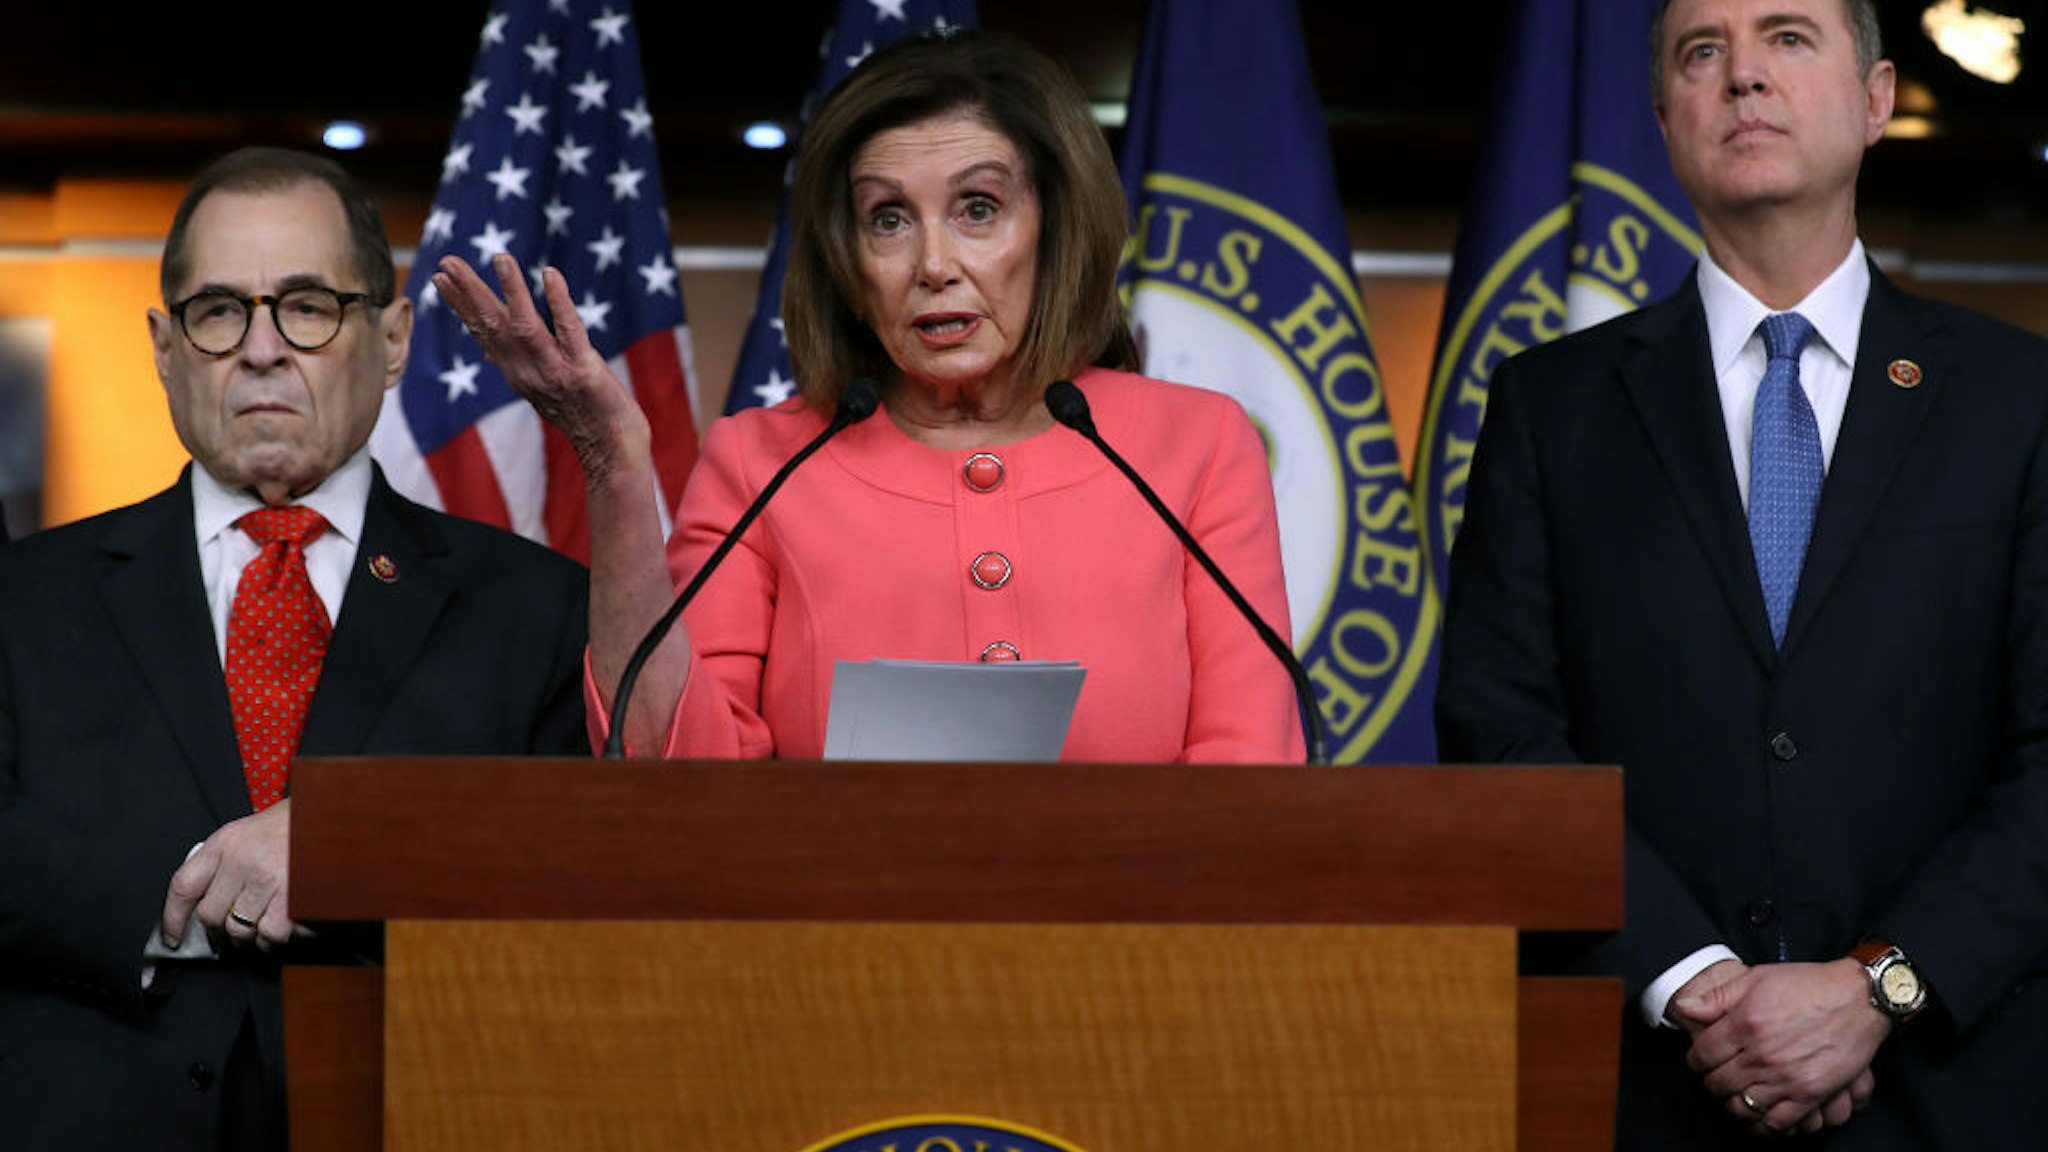 U.S. Speaker of the House Nancy Pelosi (D-CA) (C) announces that Rep. Jerrold Nadler (D-NY) (L) and Rep. Adam Schiff (D-CA) will lead the seven managers of the Senate impeachment trial of President Donald Trump at the U.S. Capitol January 15, 2020 in Washington, DC.